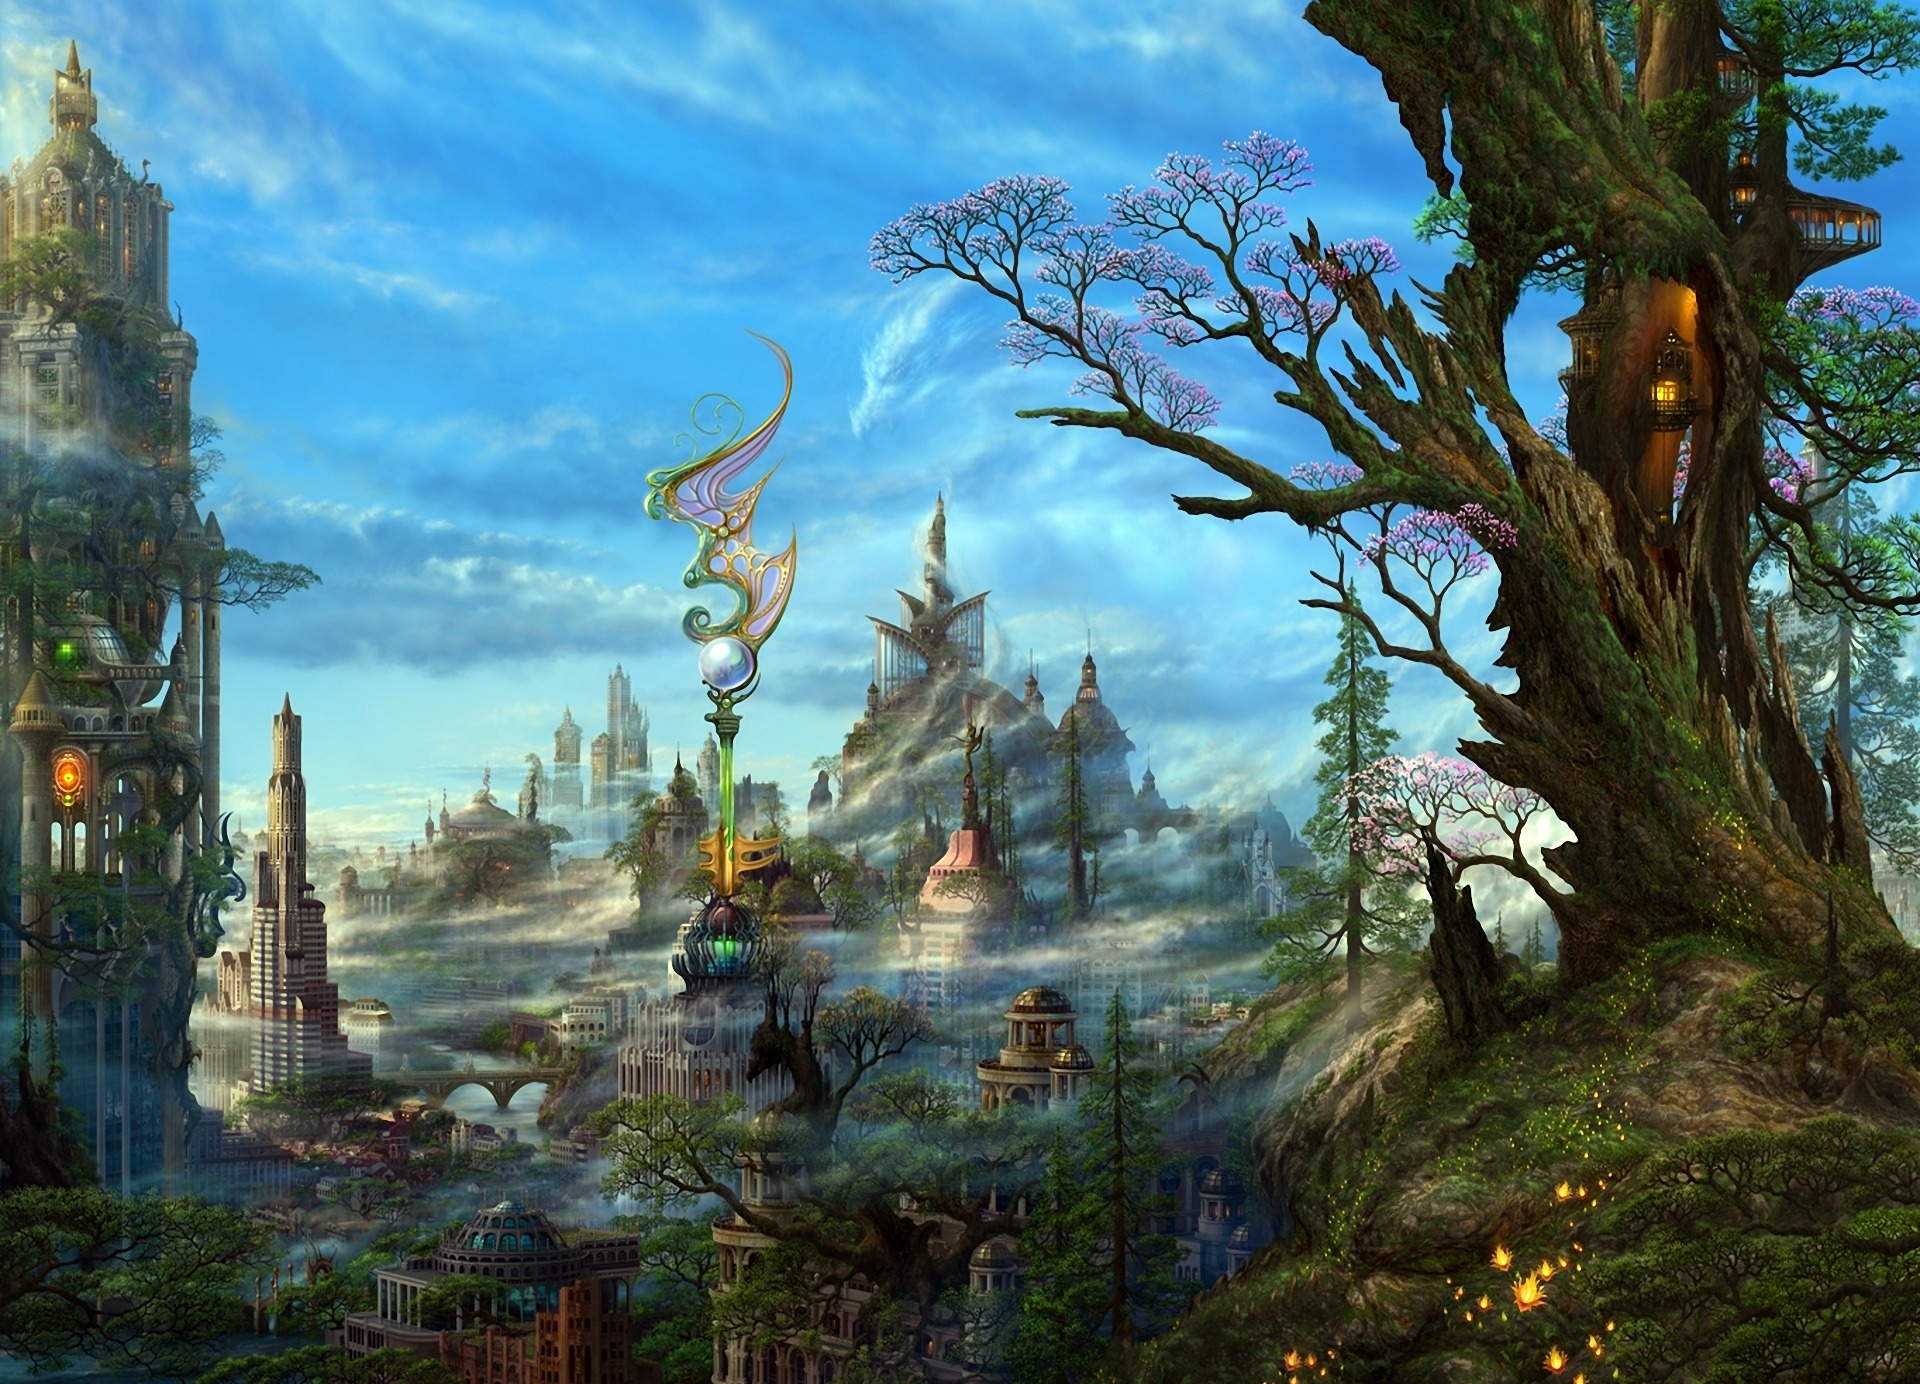 art, Ucchiey, Kazamasa, Uchio, Fantasy, Cg, Digital, Art, Paintings, Airbrushing, Anime, Landscapes, Colors, Detail, Magi, Dragons, Cities, Architecture, Buildings, Sky, Clouds, Trees, Fog, Mist, Haze, Steampunk, Wallpaper